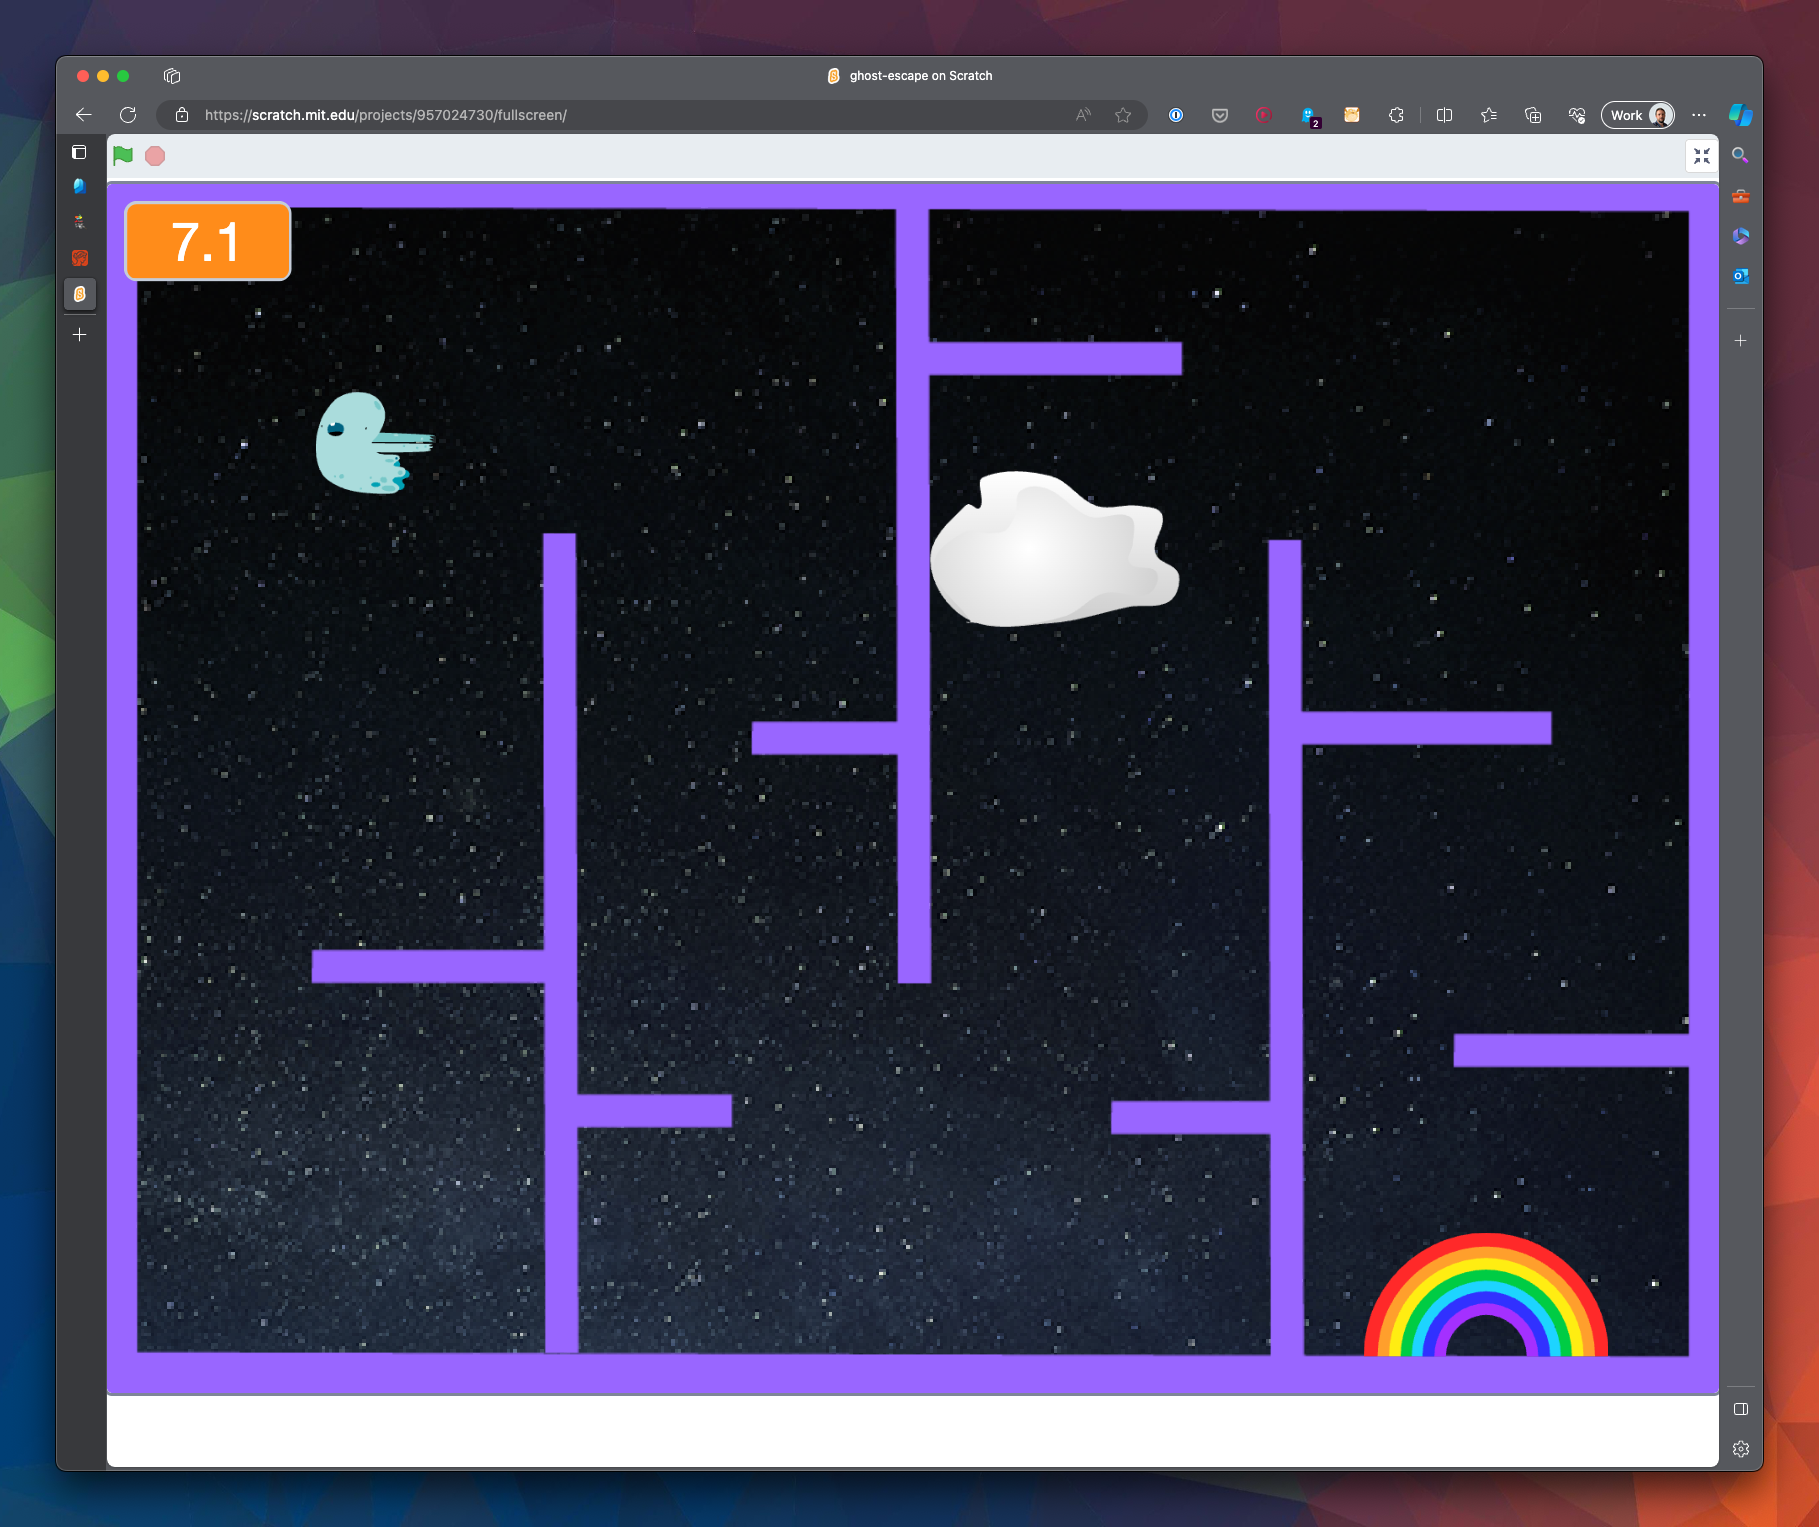 A picture of the game, there is a ghost trying to navigate around a purple maze, a cloud is chasing the ghost, and the ghost doesn't look best pleased. The ghost is trying to get to his home...a rainbow...at the end of the maze.